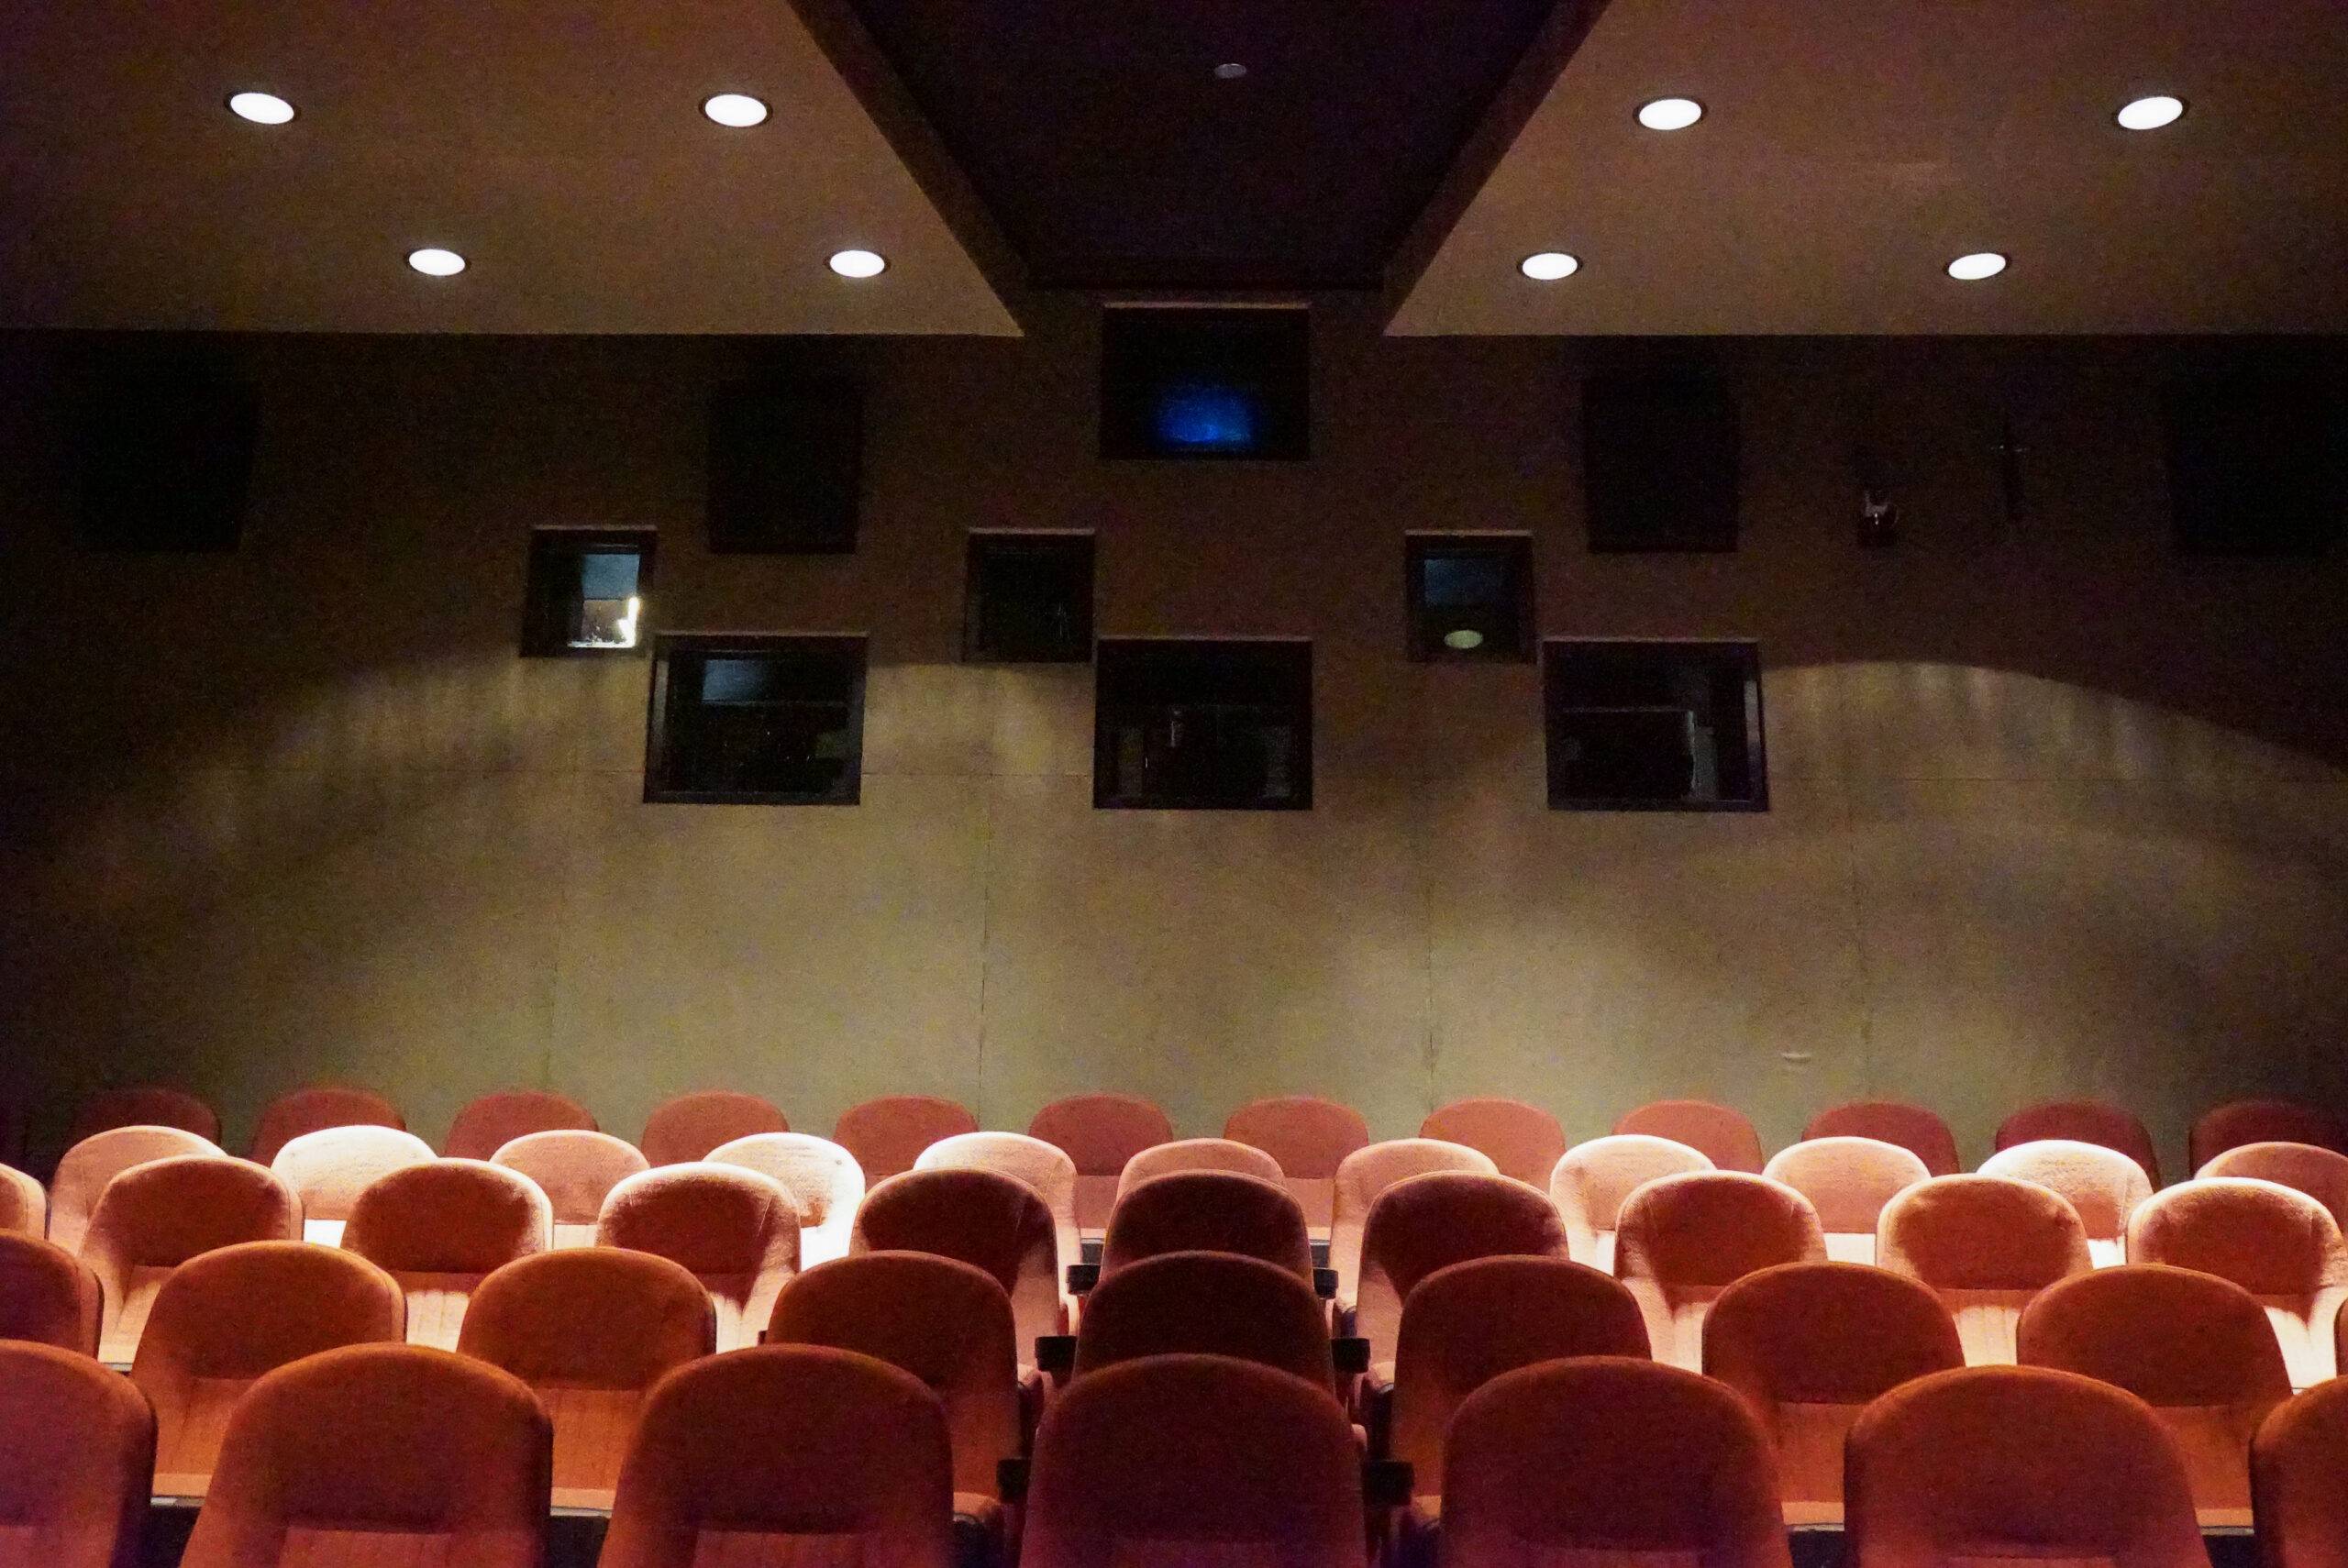 The projection windows in Theater One